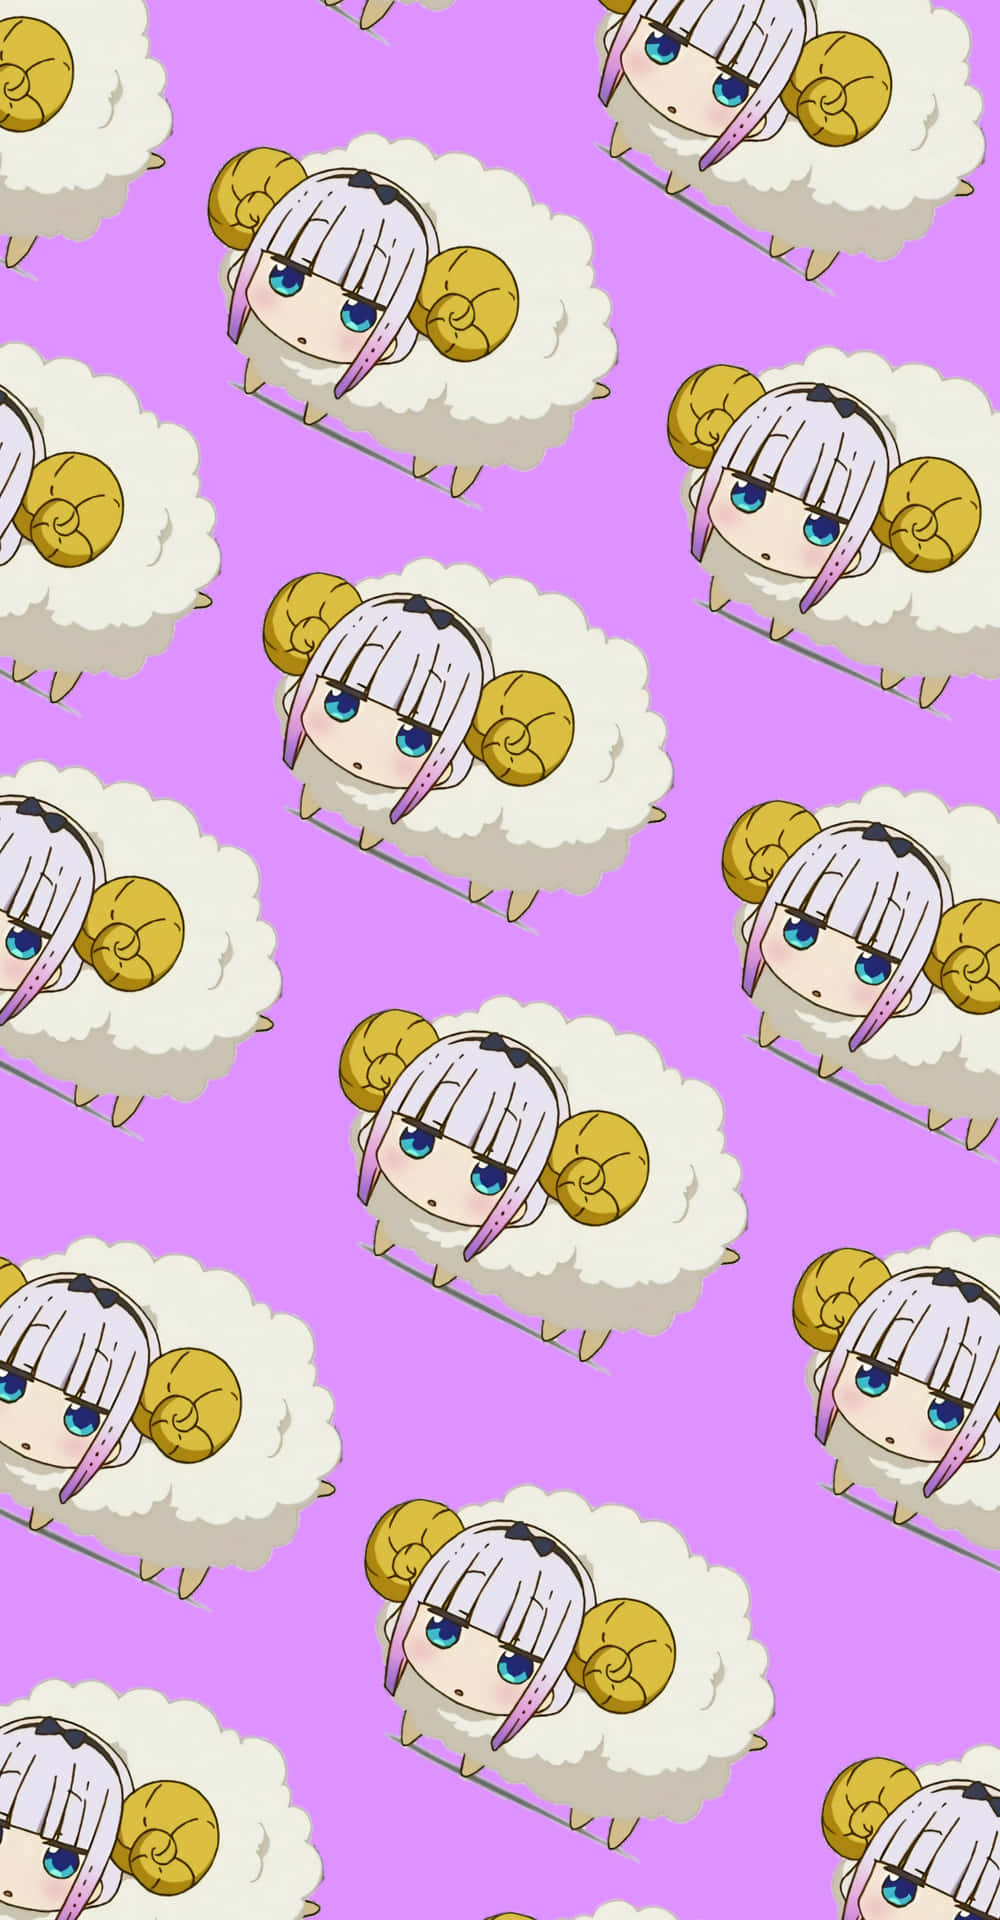 A Pattern Of Sheep With Ears And Eyes Wallpaper